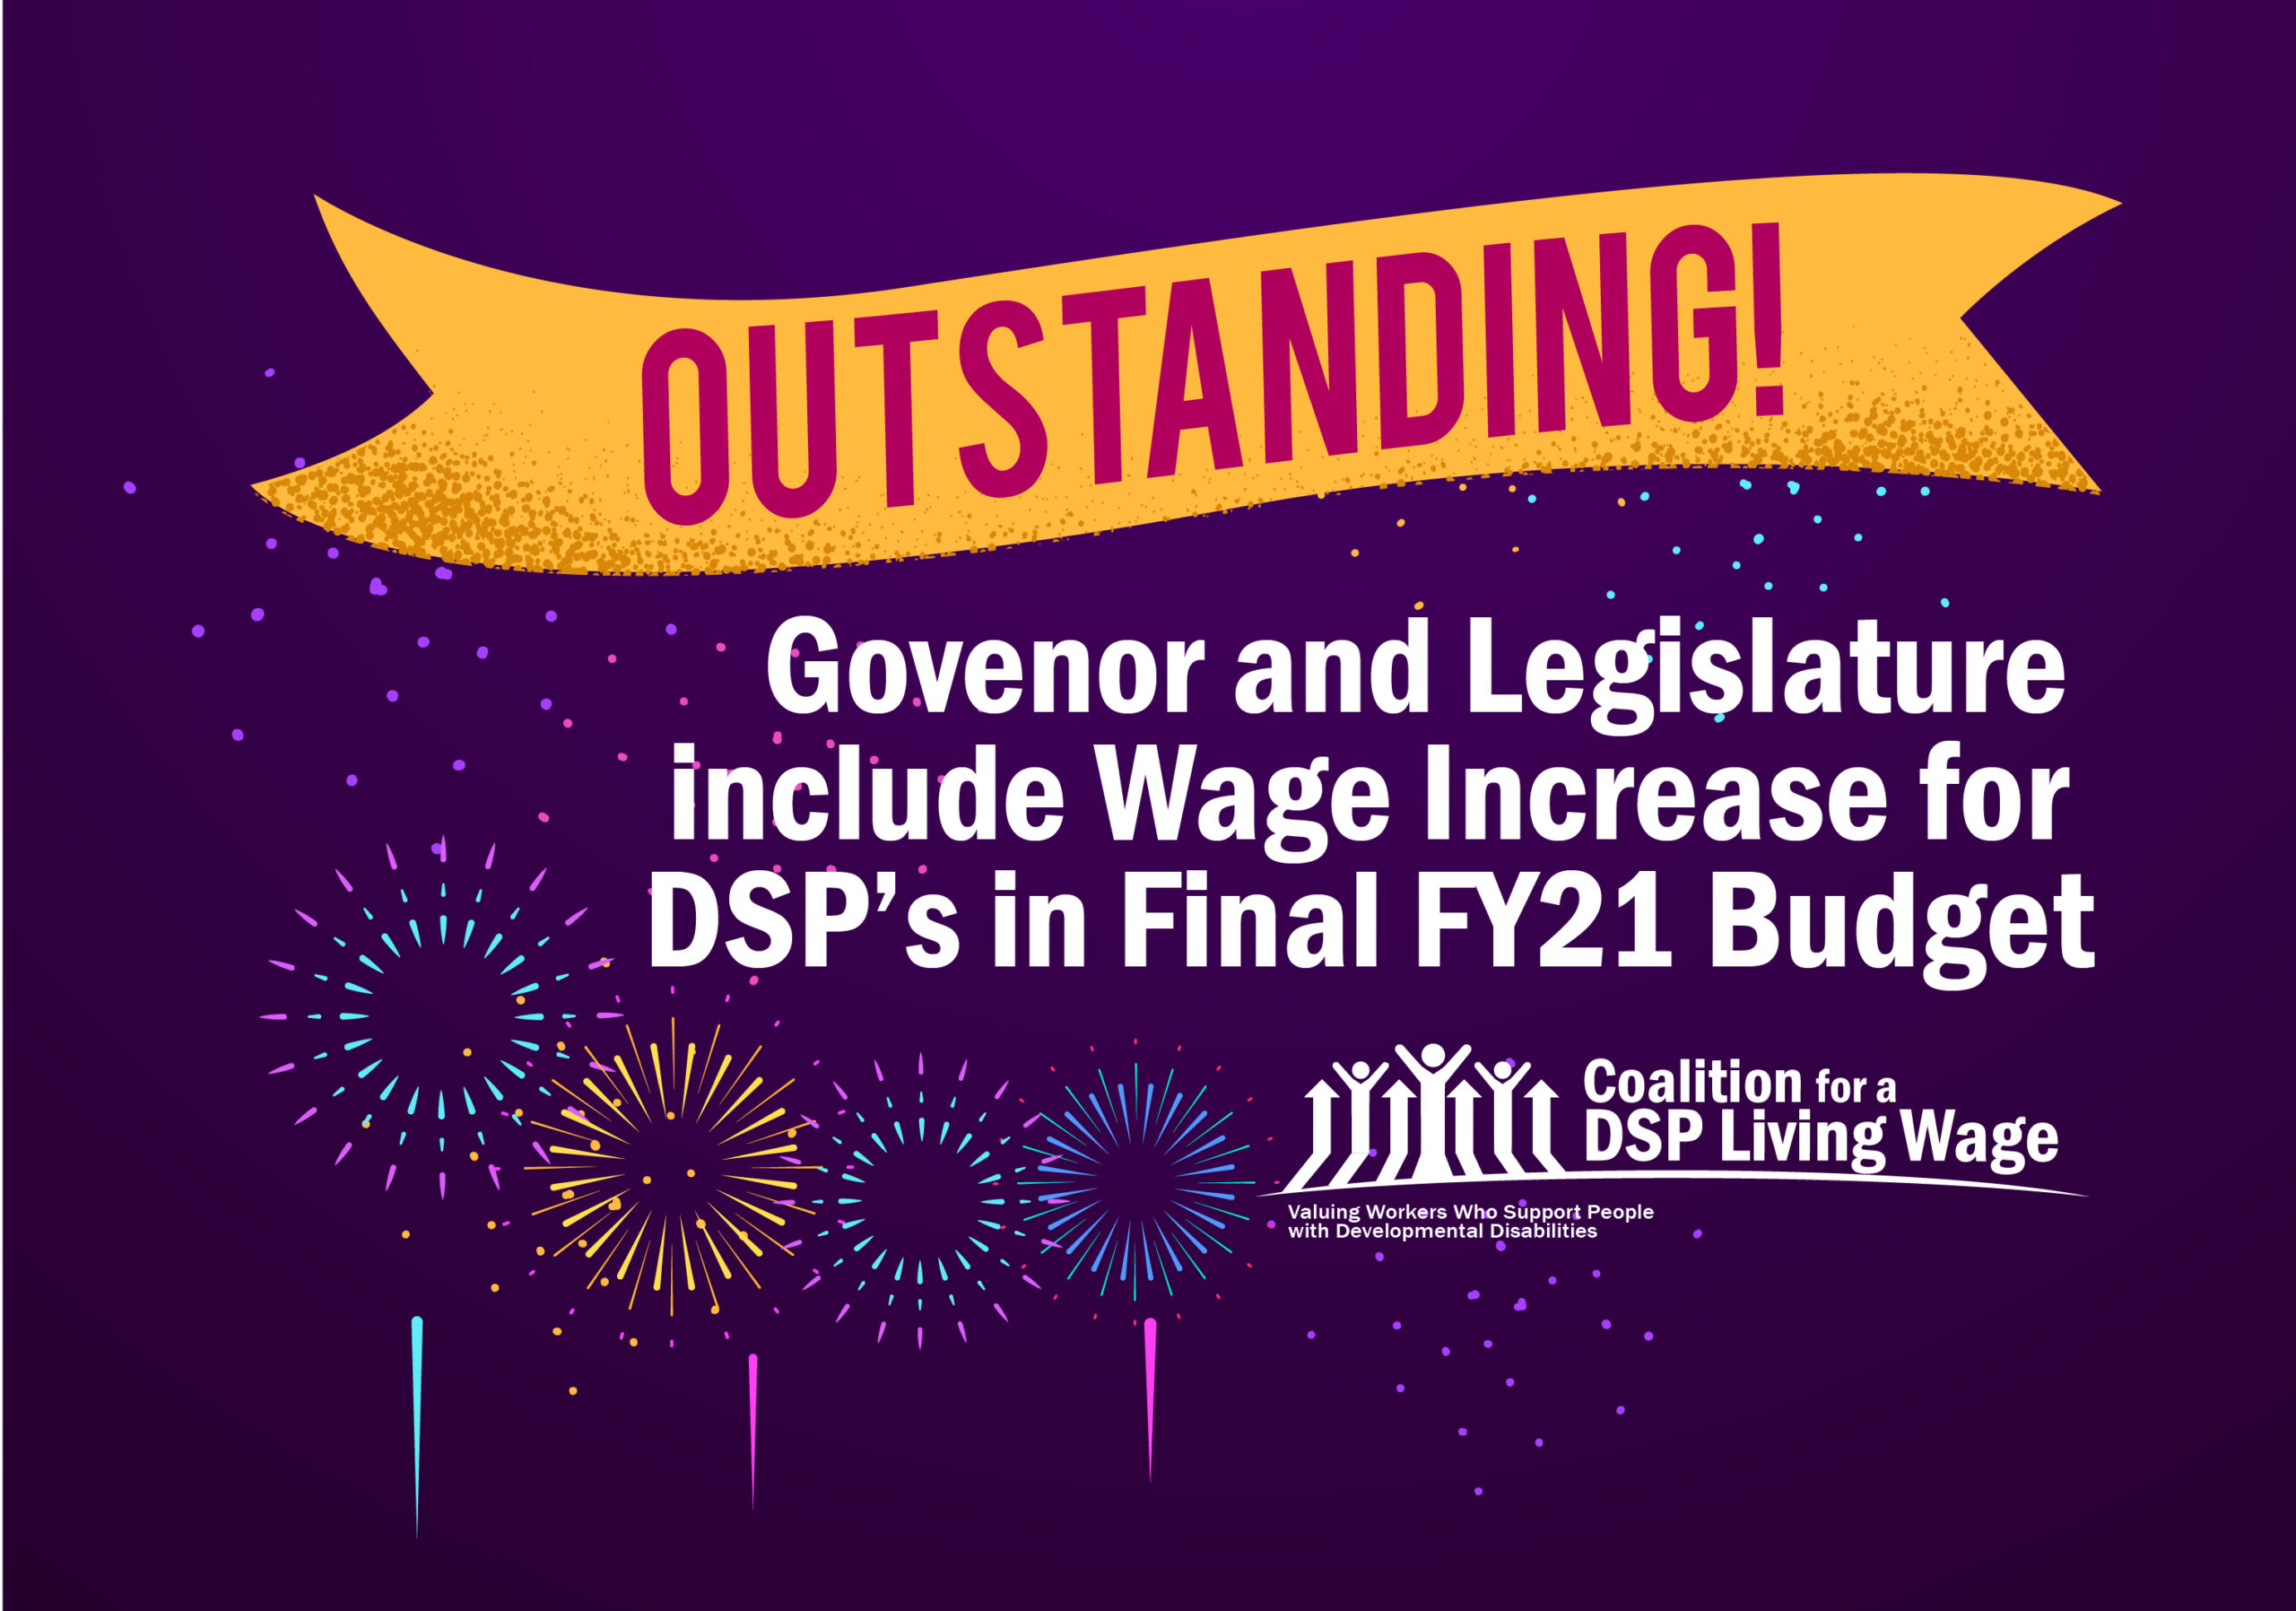 Outstanding! Gov and Leg include Wage Increase for DSP’s in Final FY21